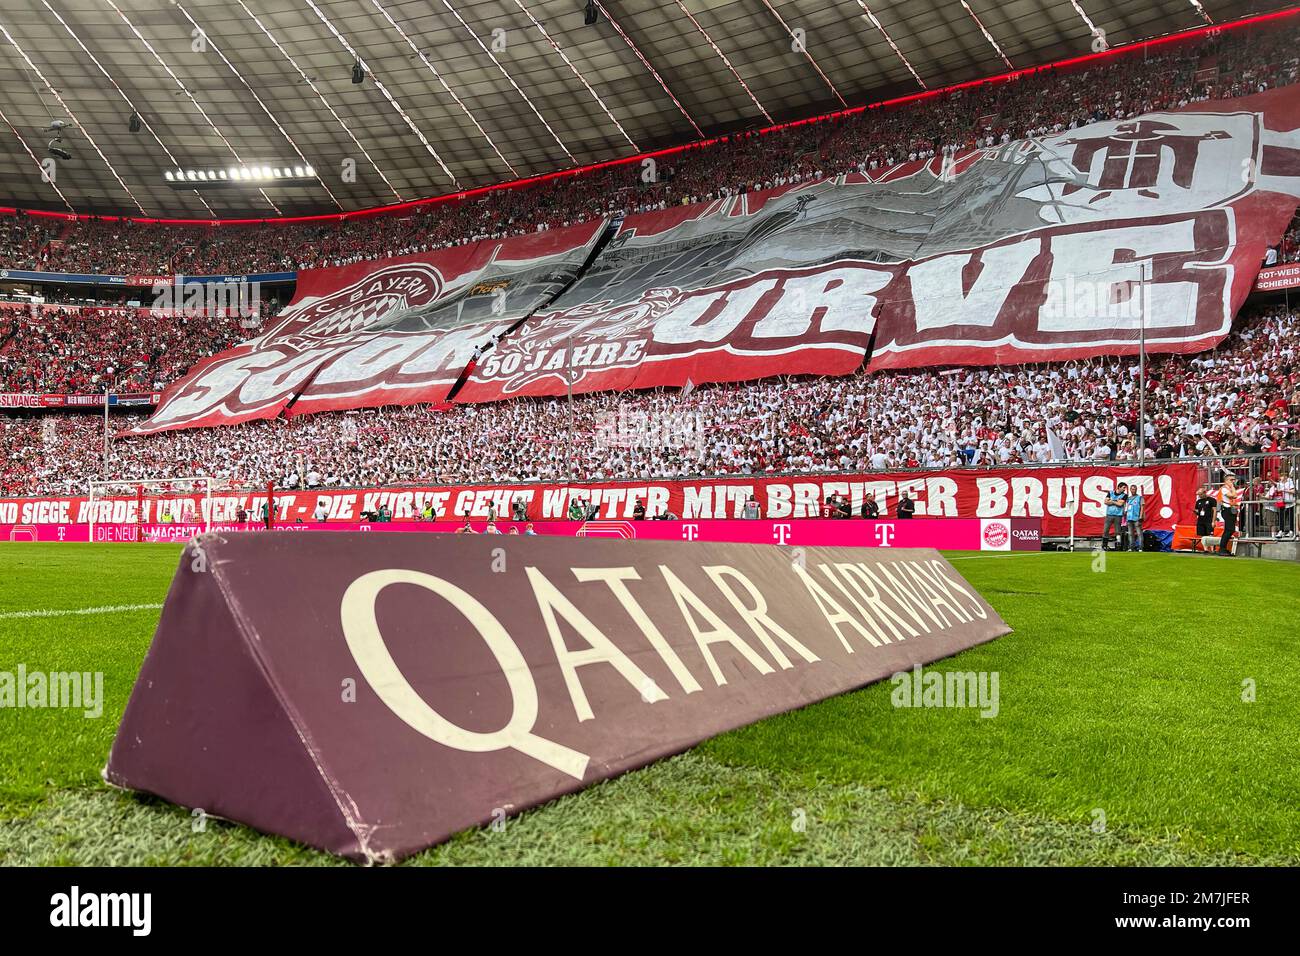 Despite criticism: FC Bayern Munich wants to extend sponsorship with Qatar  Airways. ARCHIVE PHOTO; Bayern fans, football fans, chic people, celebrate  50 years of the south curve, choreography, anniversaries, front is an